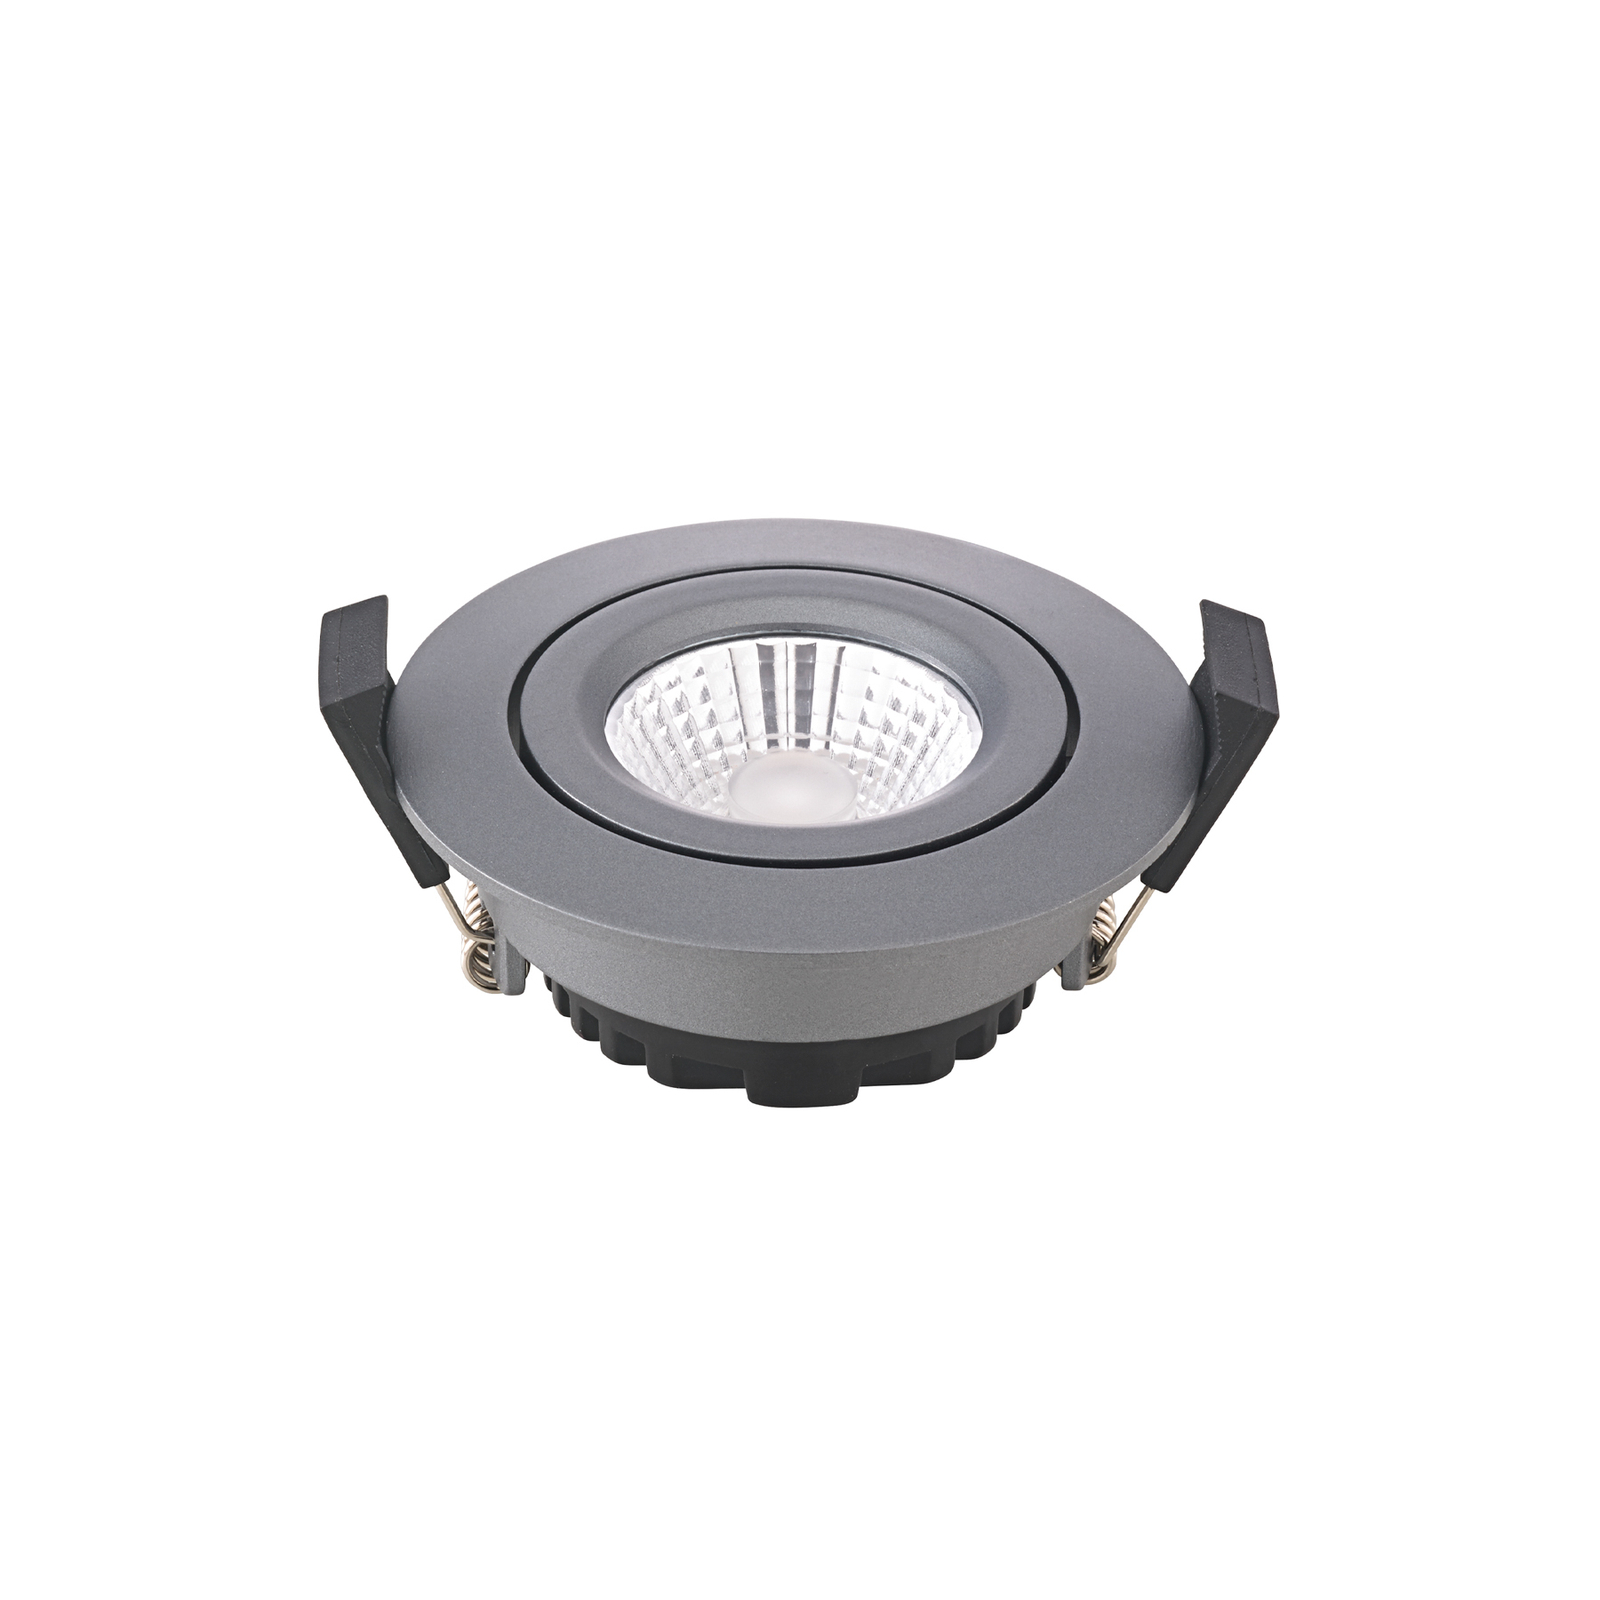 LED recessed ceiling spot Diled, Ø 8.5cm, 6 W, 3,000 K, anthracite